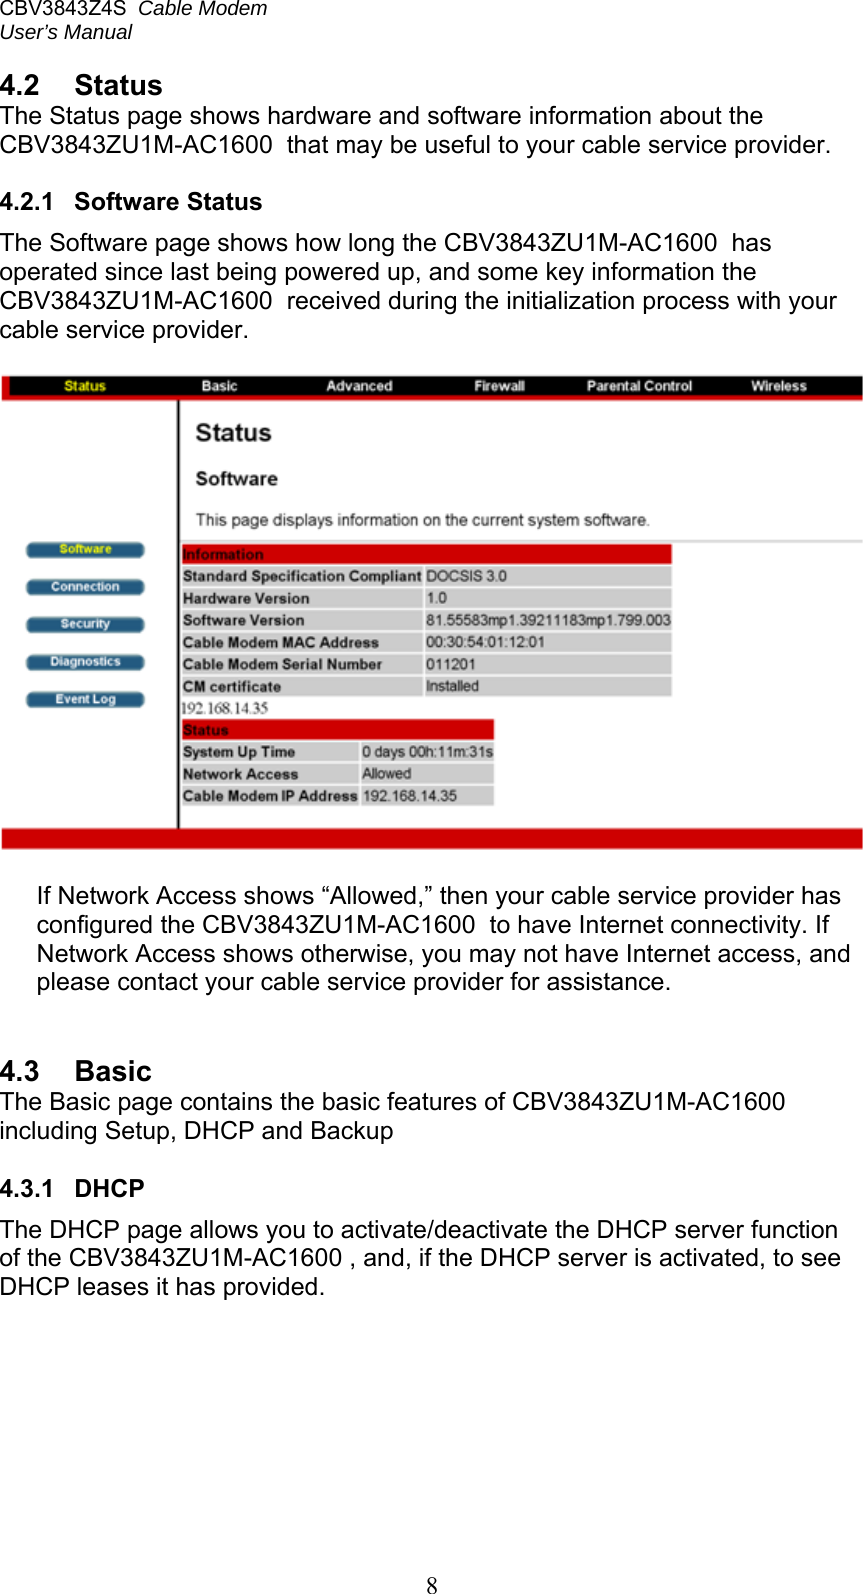 CBV3843Z4S  Cable Modem  User’s Manual   8 4.2  Status The Status page shows hardware and software information about the CBV3843ZU1M-AC1600  that may be useful to your cable service provider.  4.2.1  Software Status The Software page shows how long the CBV3843ZU1M-AC1600  has operated since last being powered up, and some key information the CBV3843ZU1M-AC1600  received during the initialization process with your cable service provider.    If Network Access shows “Allowed,” then your cable service provider has configured the CBV3843ZU1M-AC1600  to have Internet connectivity. If Network Access shows otherwise, you may not have Internet access, and please contact your cable service provider for assistance.   4.3  Basic The Basic page contains the basic features of CBV3843ZU1M-AC1600  including Setup, DHCP and Backup  4.3.1  DHCP The DHCP page allows you to activate/deactivate the DHCP server function of the CBV3843ZU1M-AC1600 , and, if the DHCP server is activated, to see DHCP leases it has provided. 